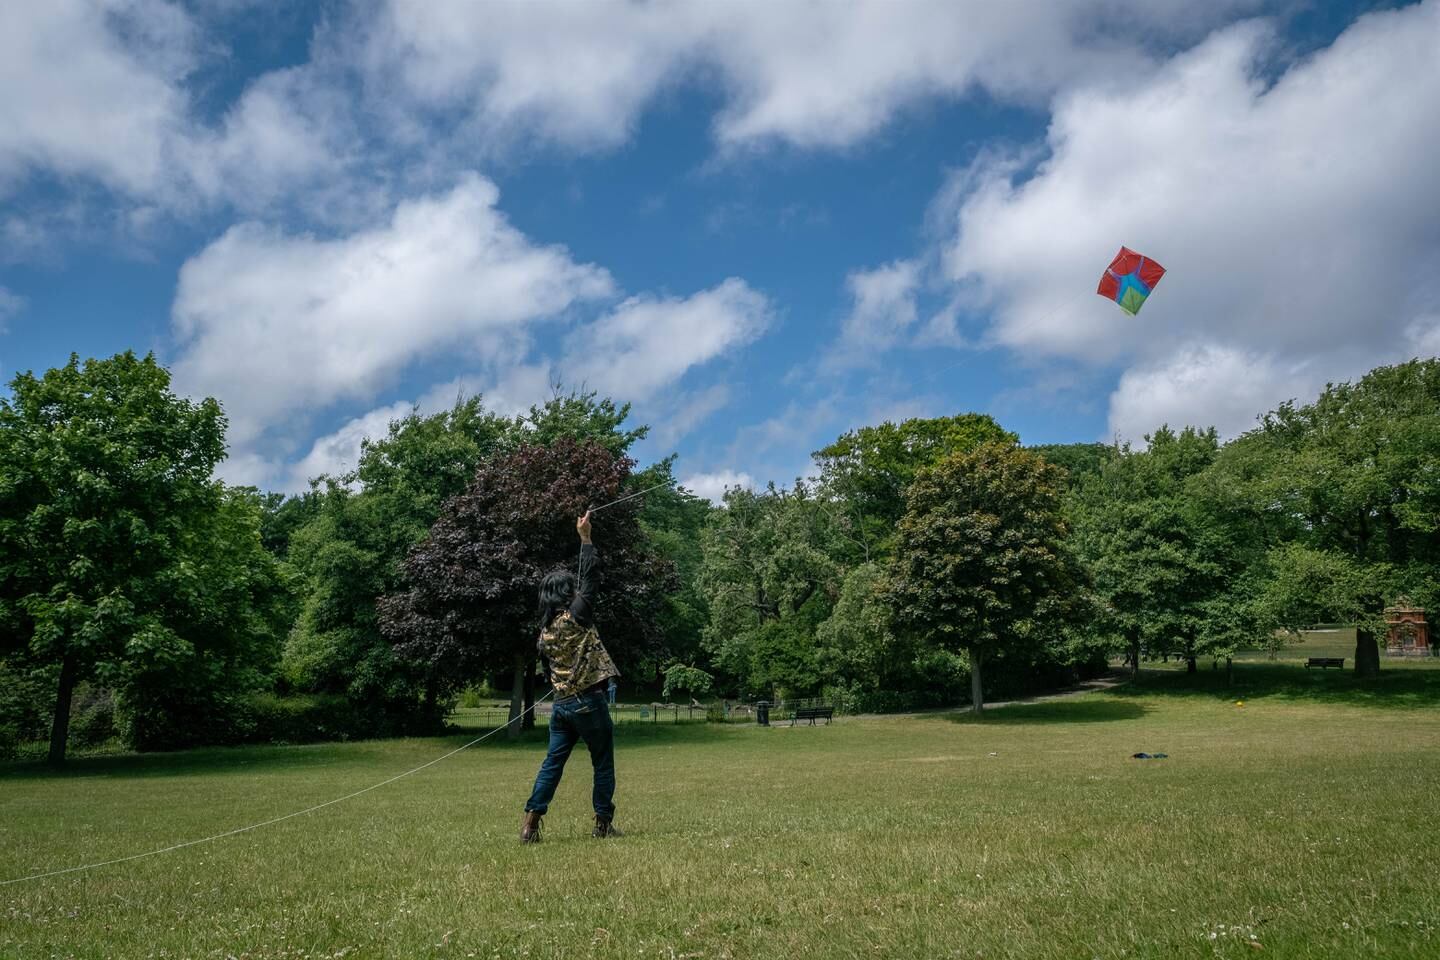 Fly With Me, which is taking place in UK and European cities, is an Afghan kite-flying festival in solidarity with the people of Afghanistan. Photo: Fly With Me